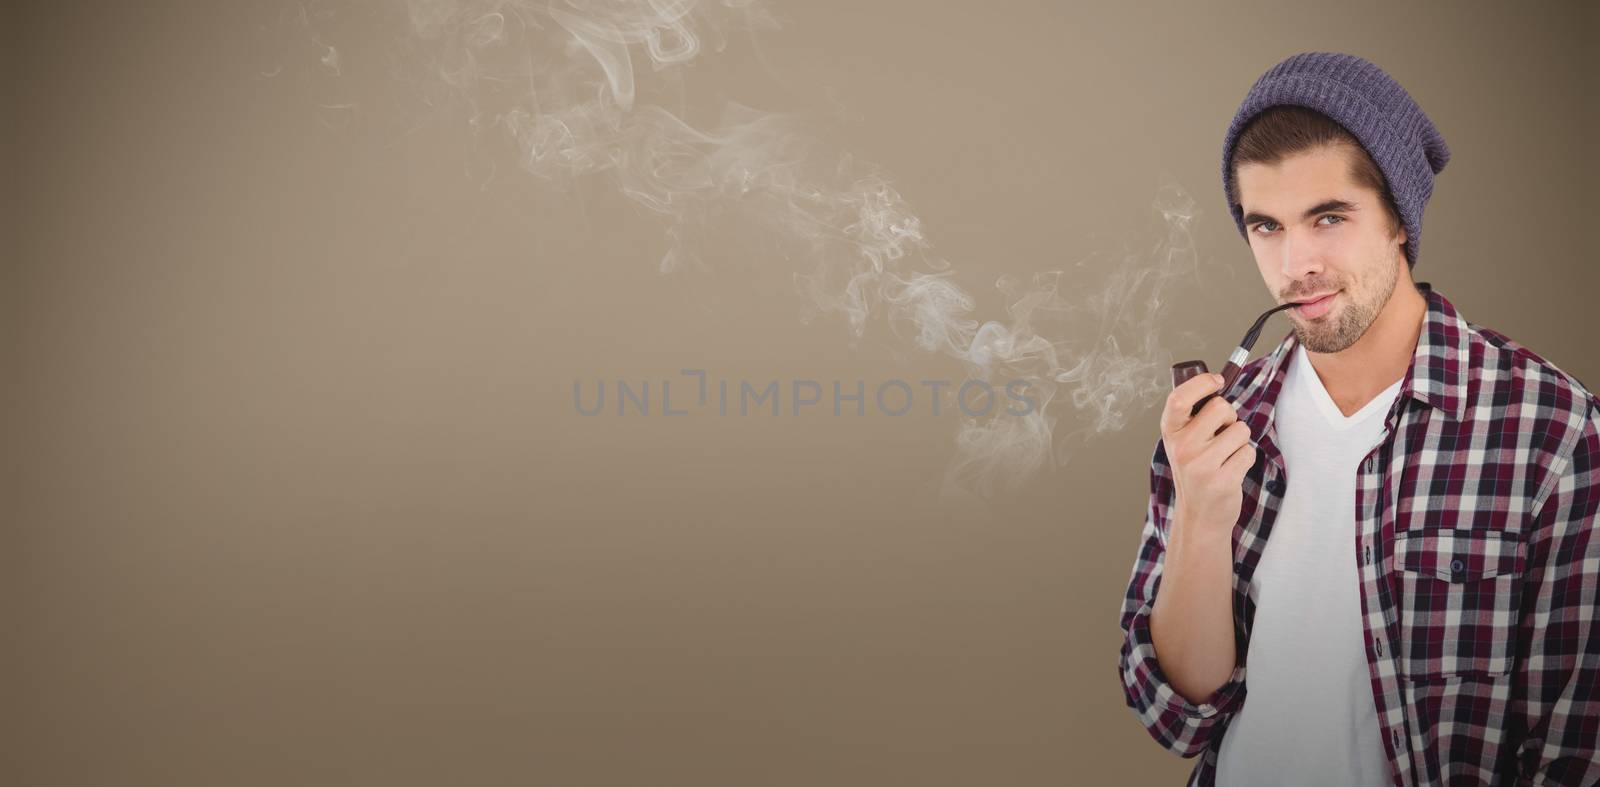 Portrait of  confident hipster holding smoking pipe against grey background with vignette